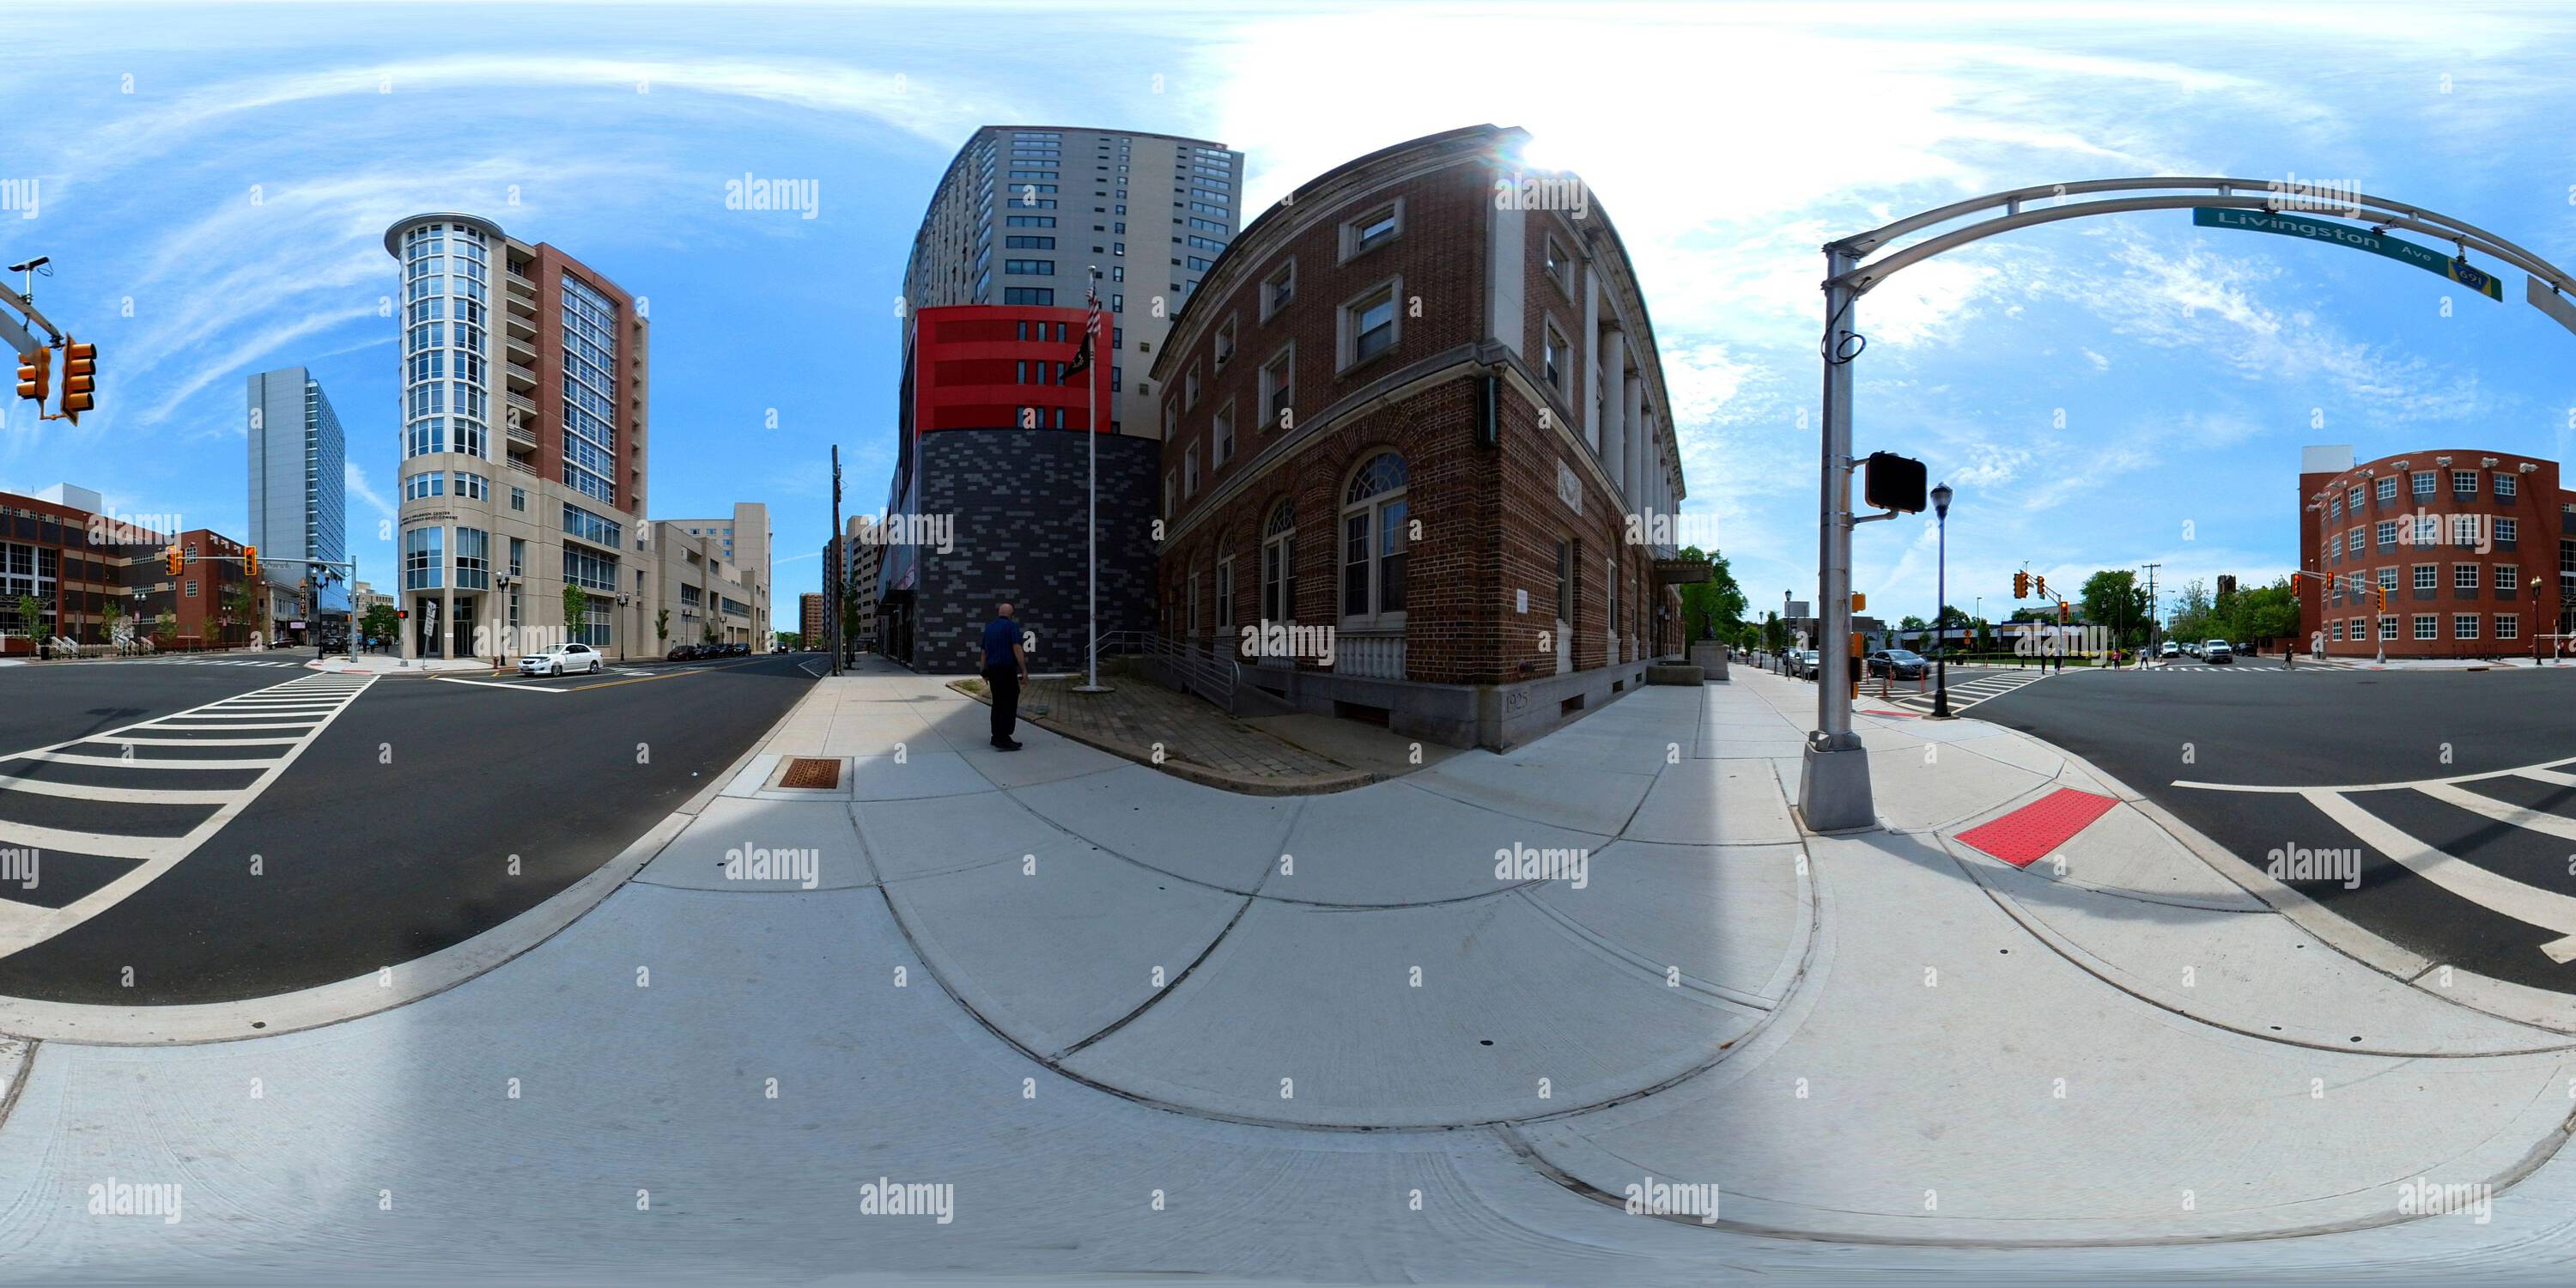 360 degree panoramic view of Downtown New Brunswick, NJ at the intersection of Livingston Avenue and George Street with the Heldrich Hotel and New Brunswick Performing Arts center